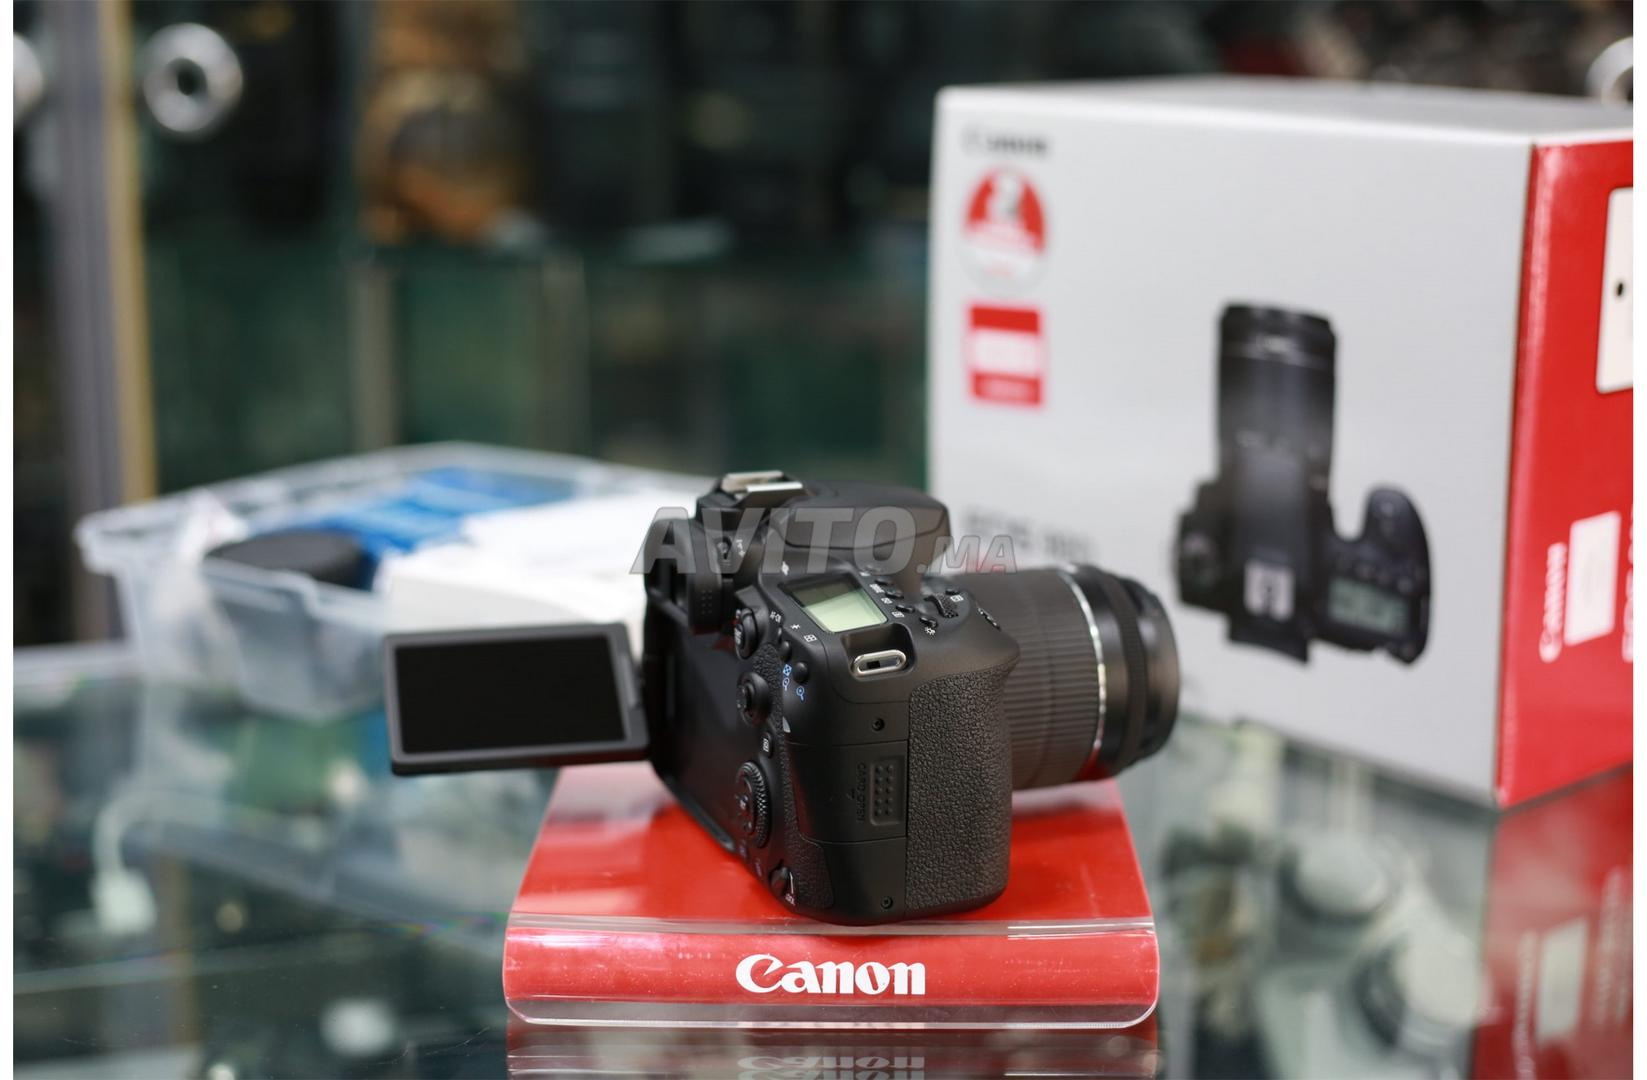 canon eos 90d dslr camera with 18/55mm lens - 4